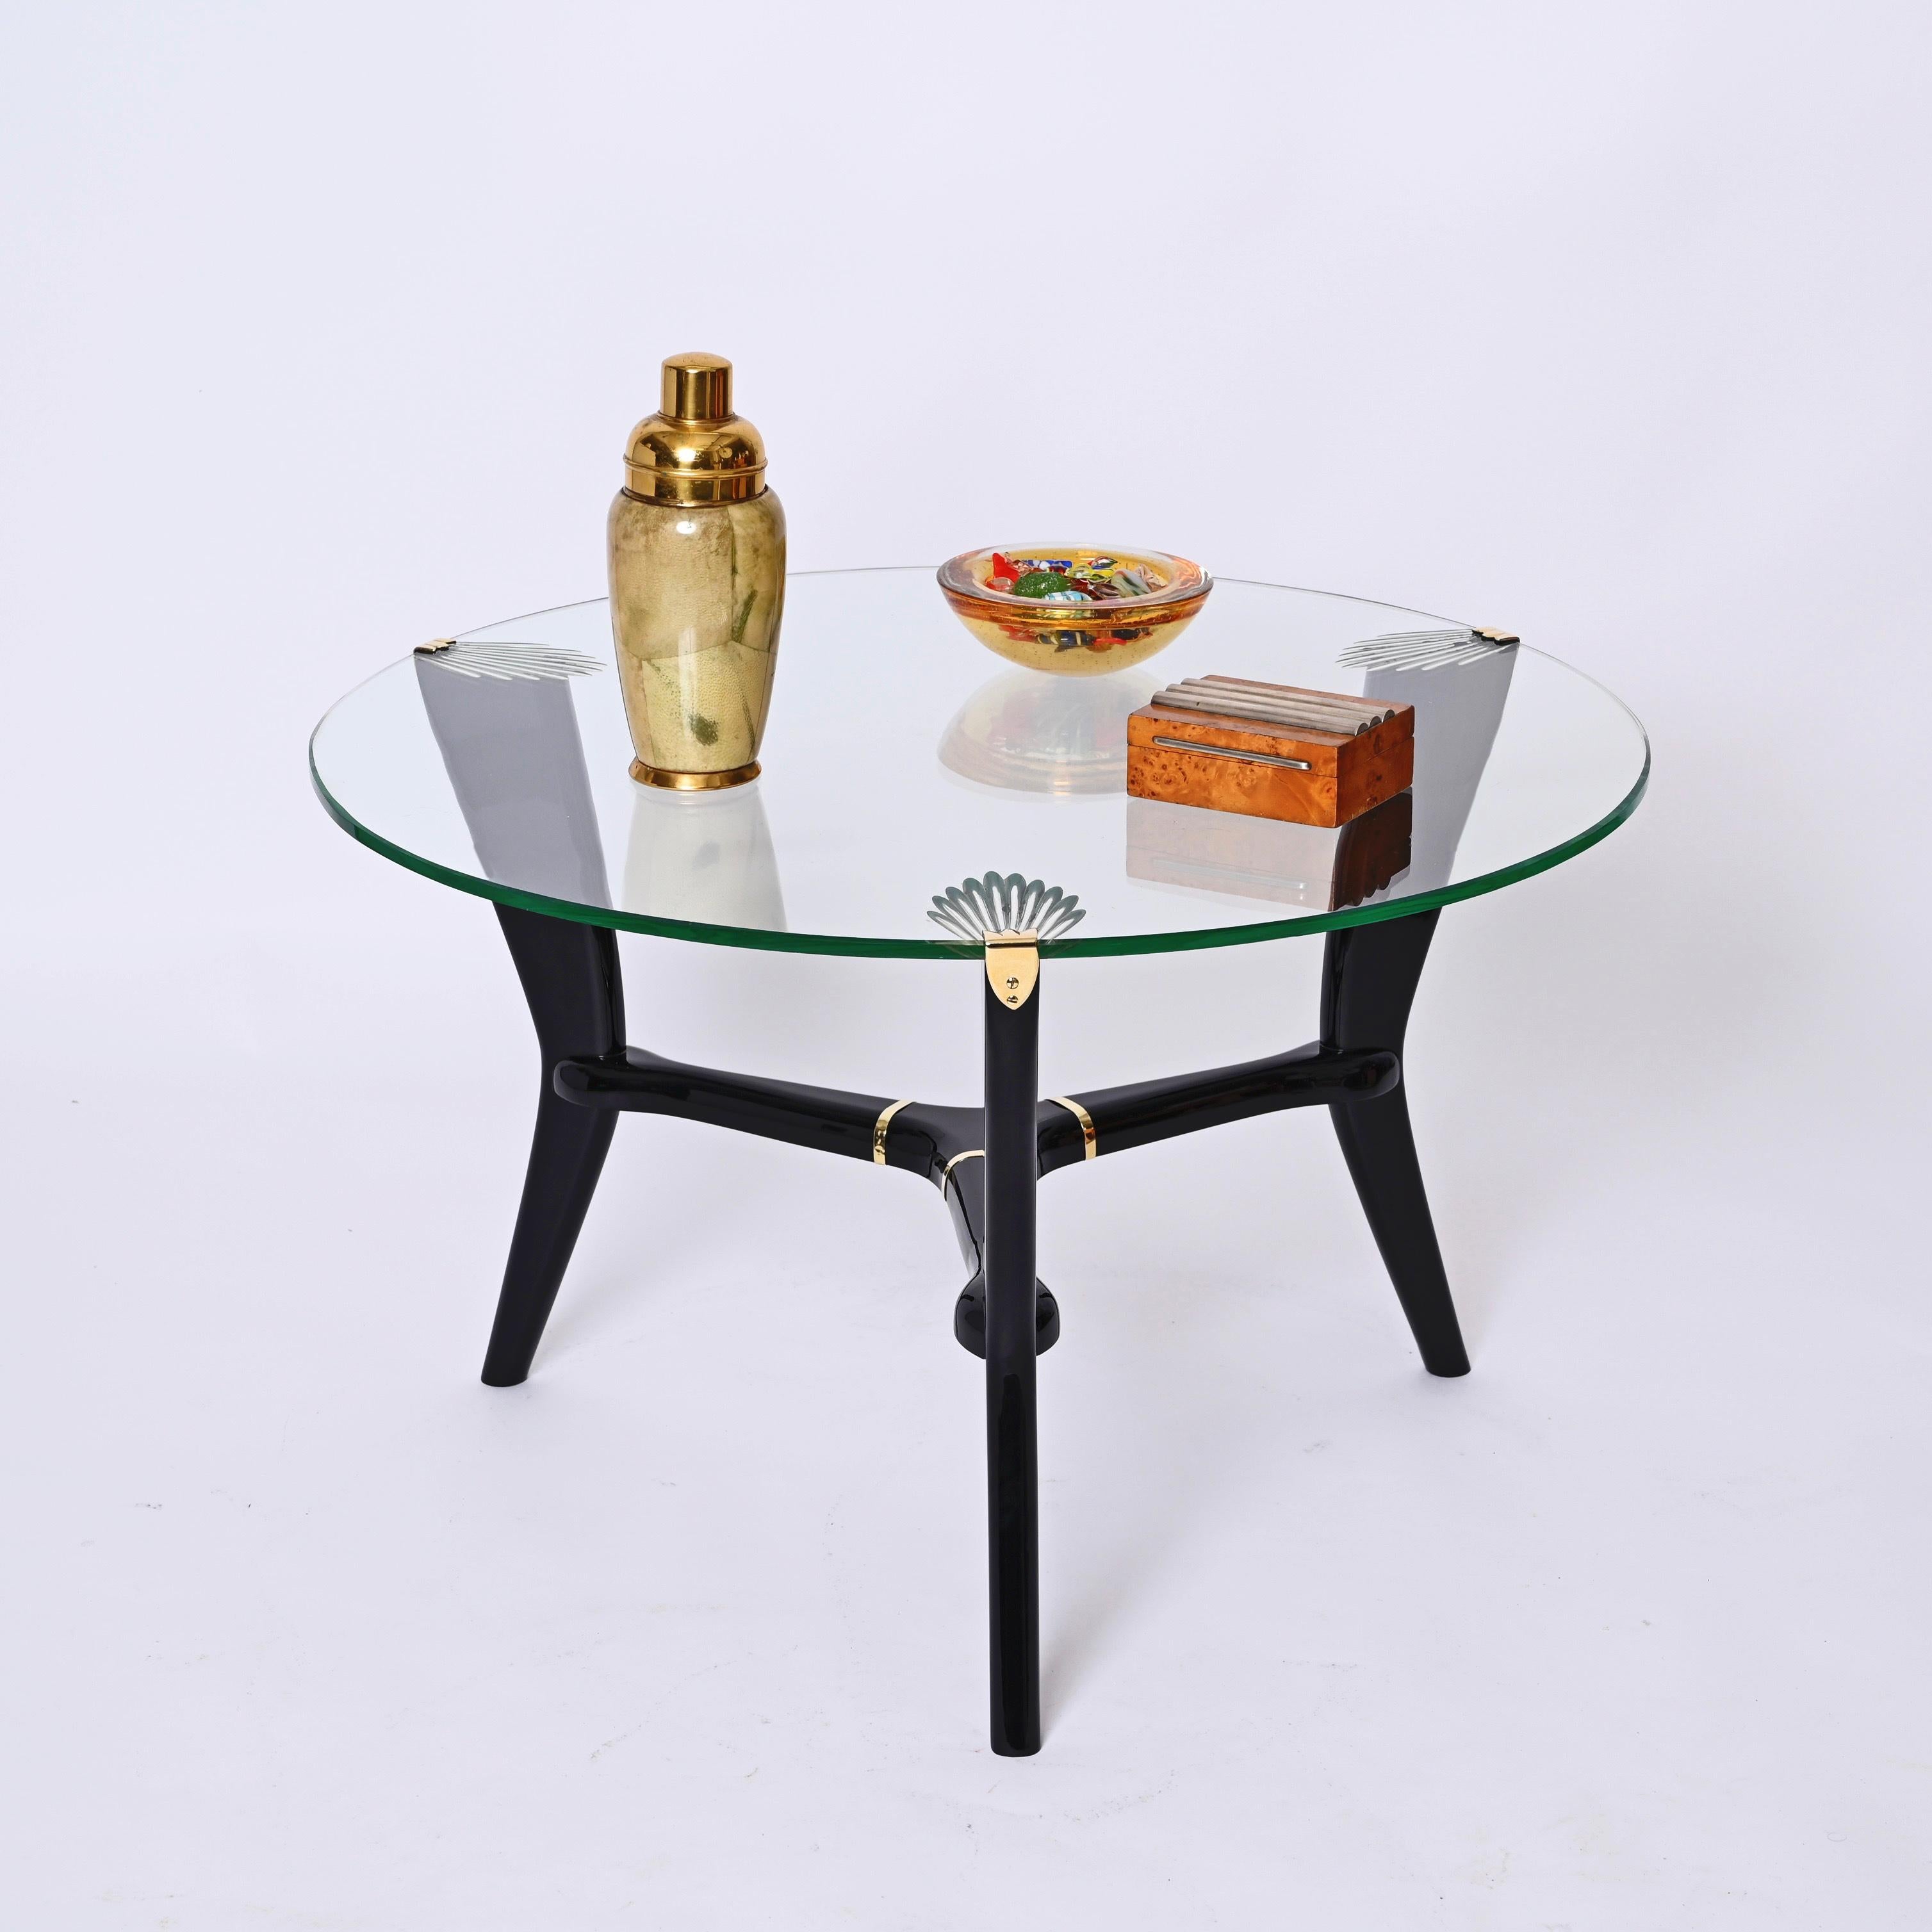 Wonderful art deco ebonized wood, crystal glass round coffee table. This fantastic piece was designed in Italy during the 1940s in the style of Gio Ponti.

This table is unique thanks to its ebonized legs, kept together in the iconic shape through